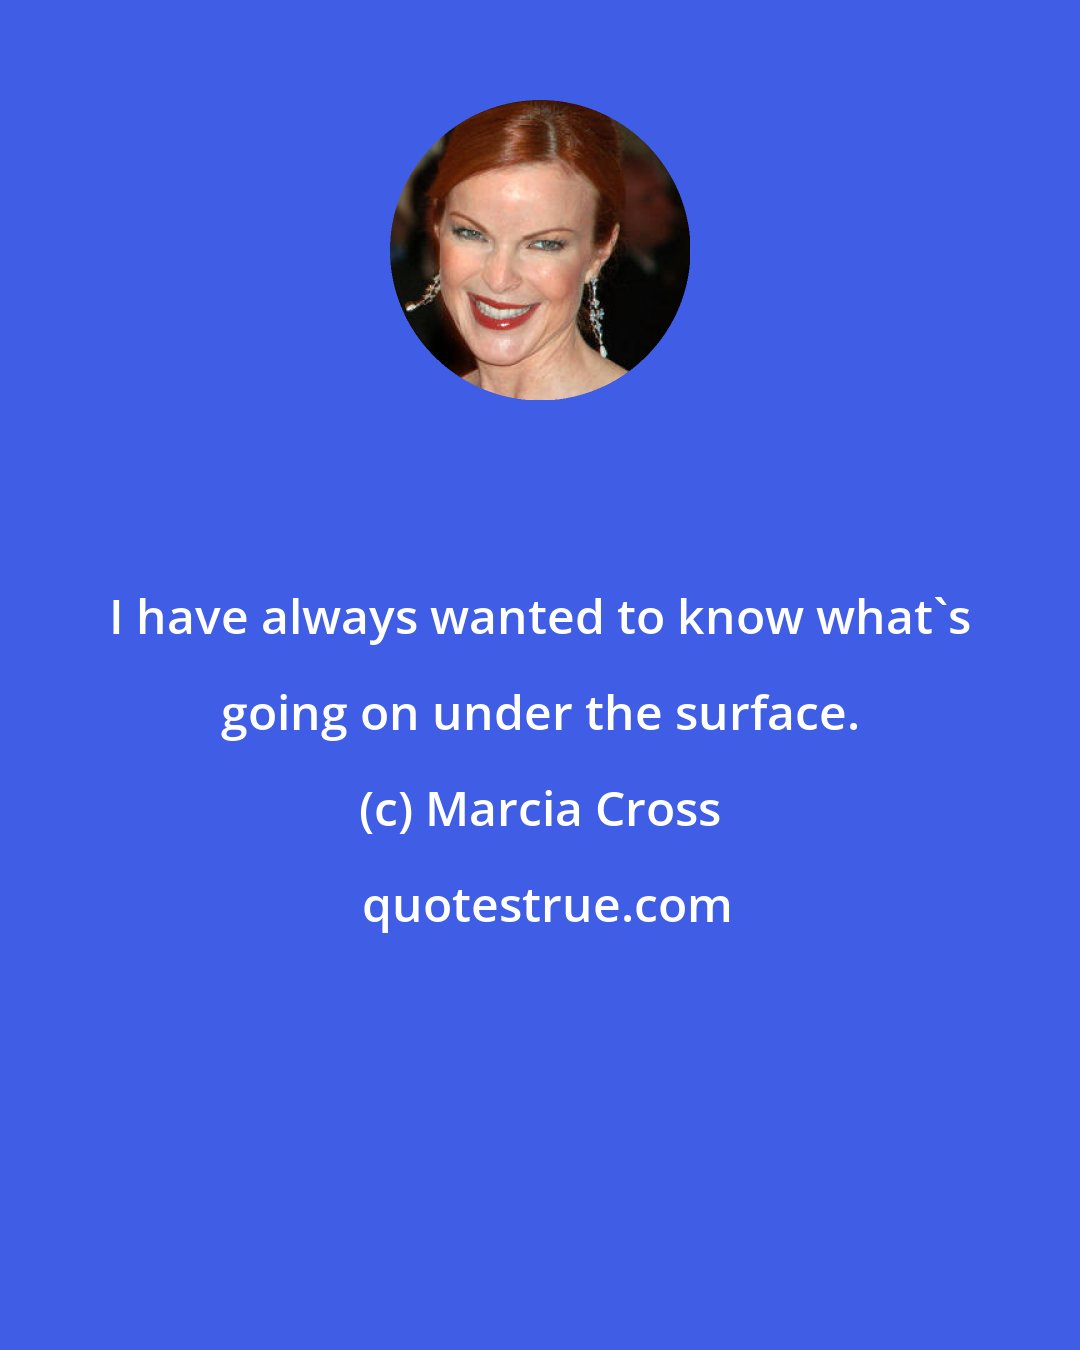 Marcia Cross: I have always wanted to know what's going on under the surface.